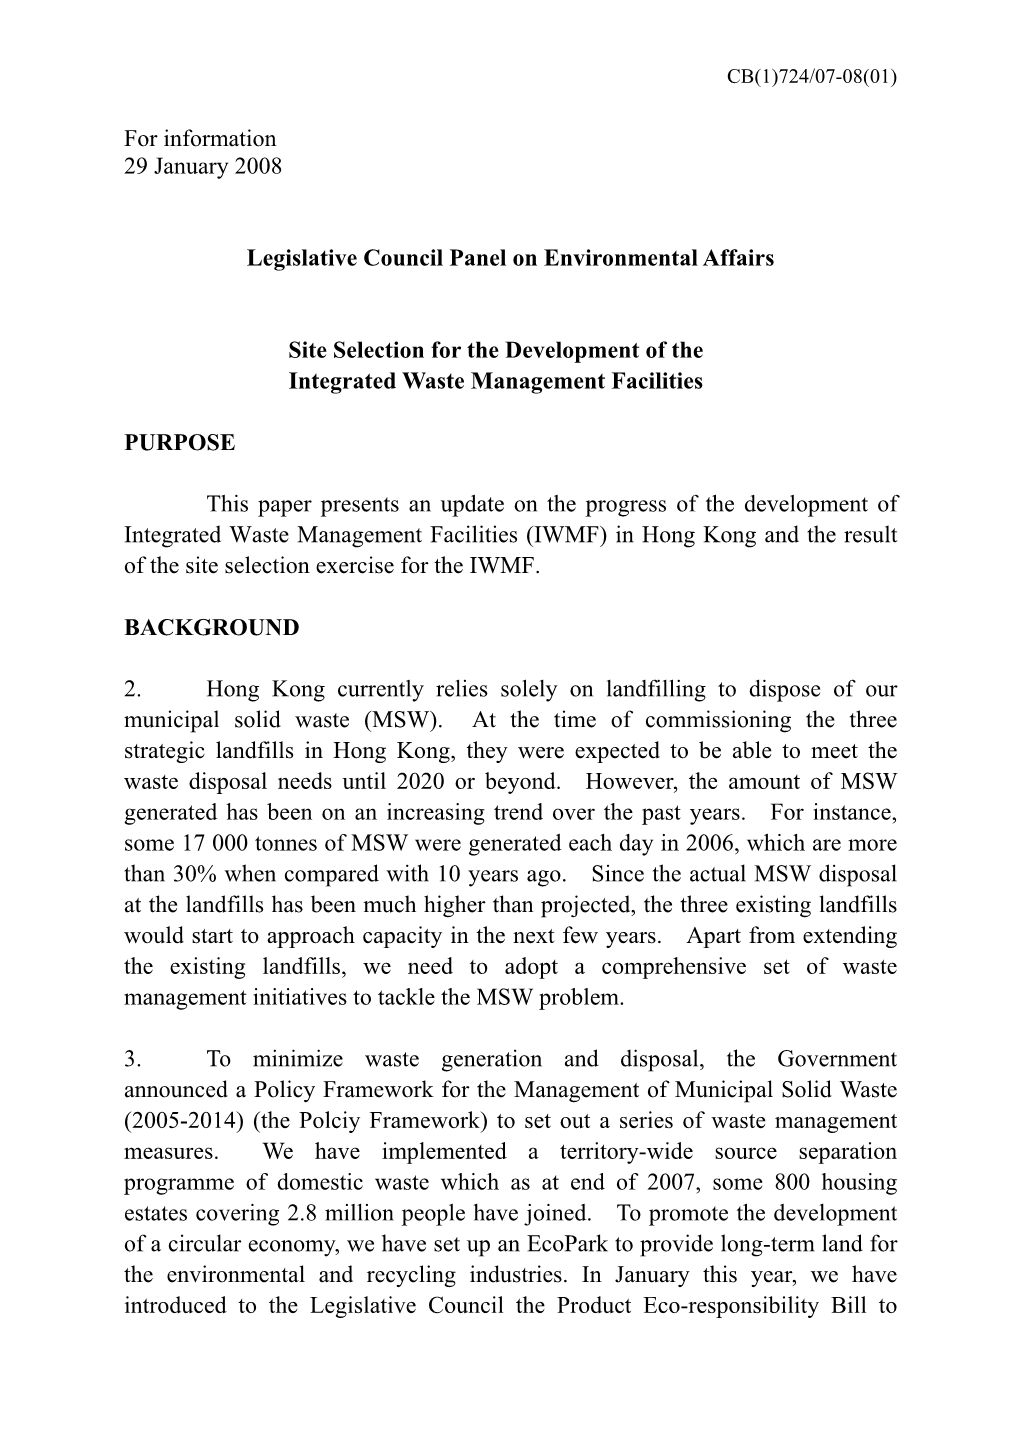 Administration's Paper on "Site Selection for the Development of the Integrated Waste Management Facilities"